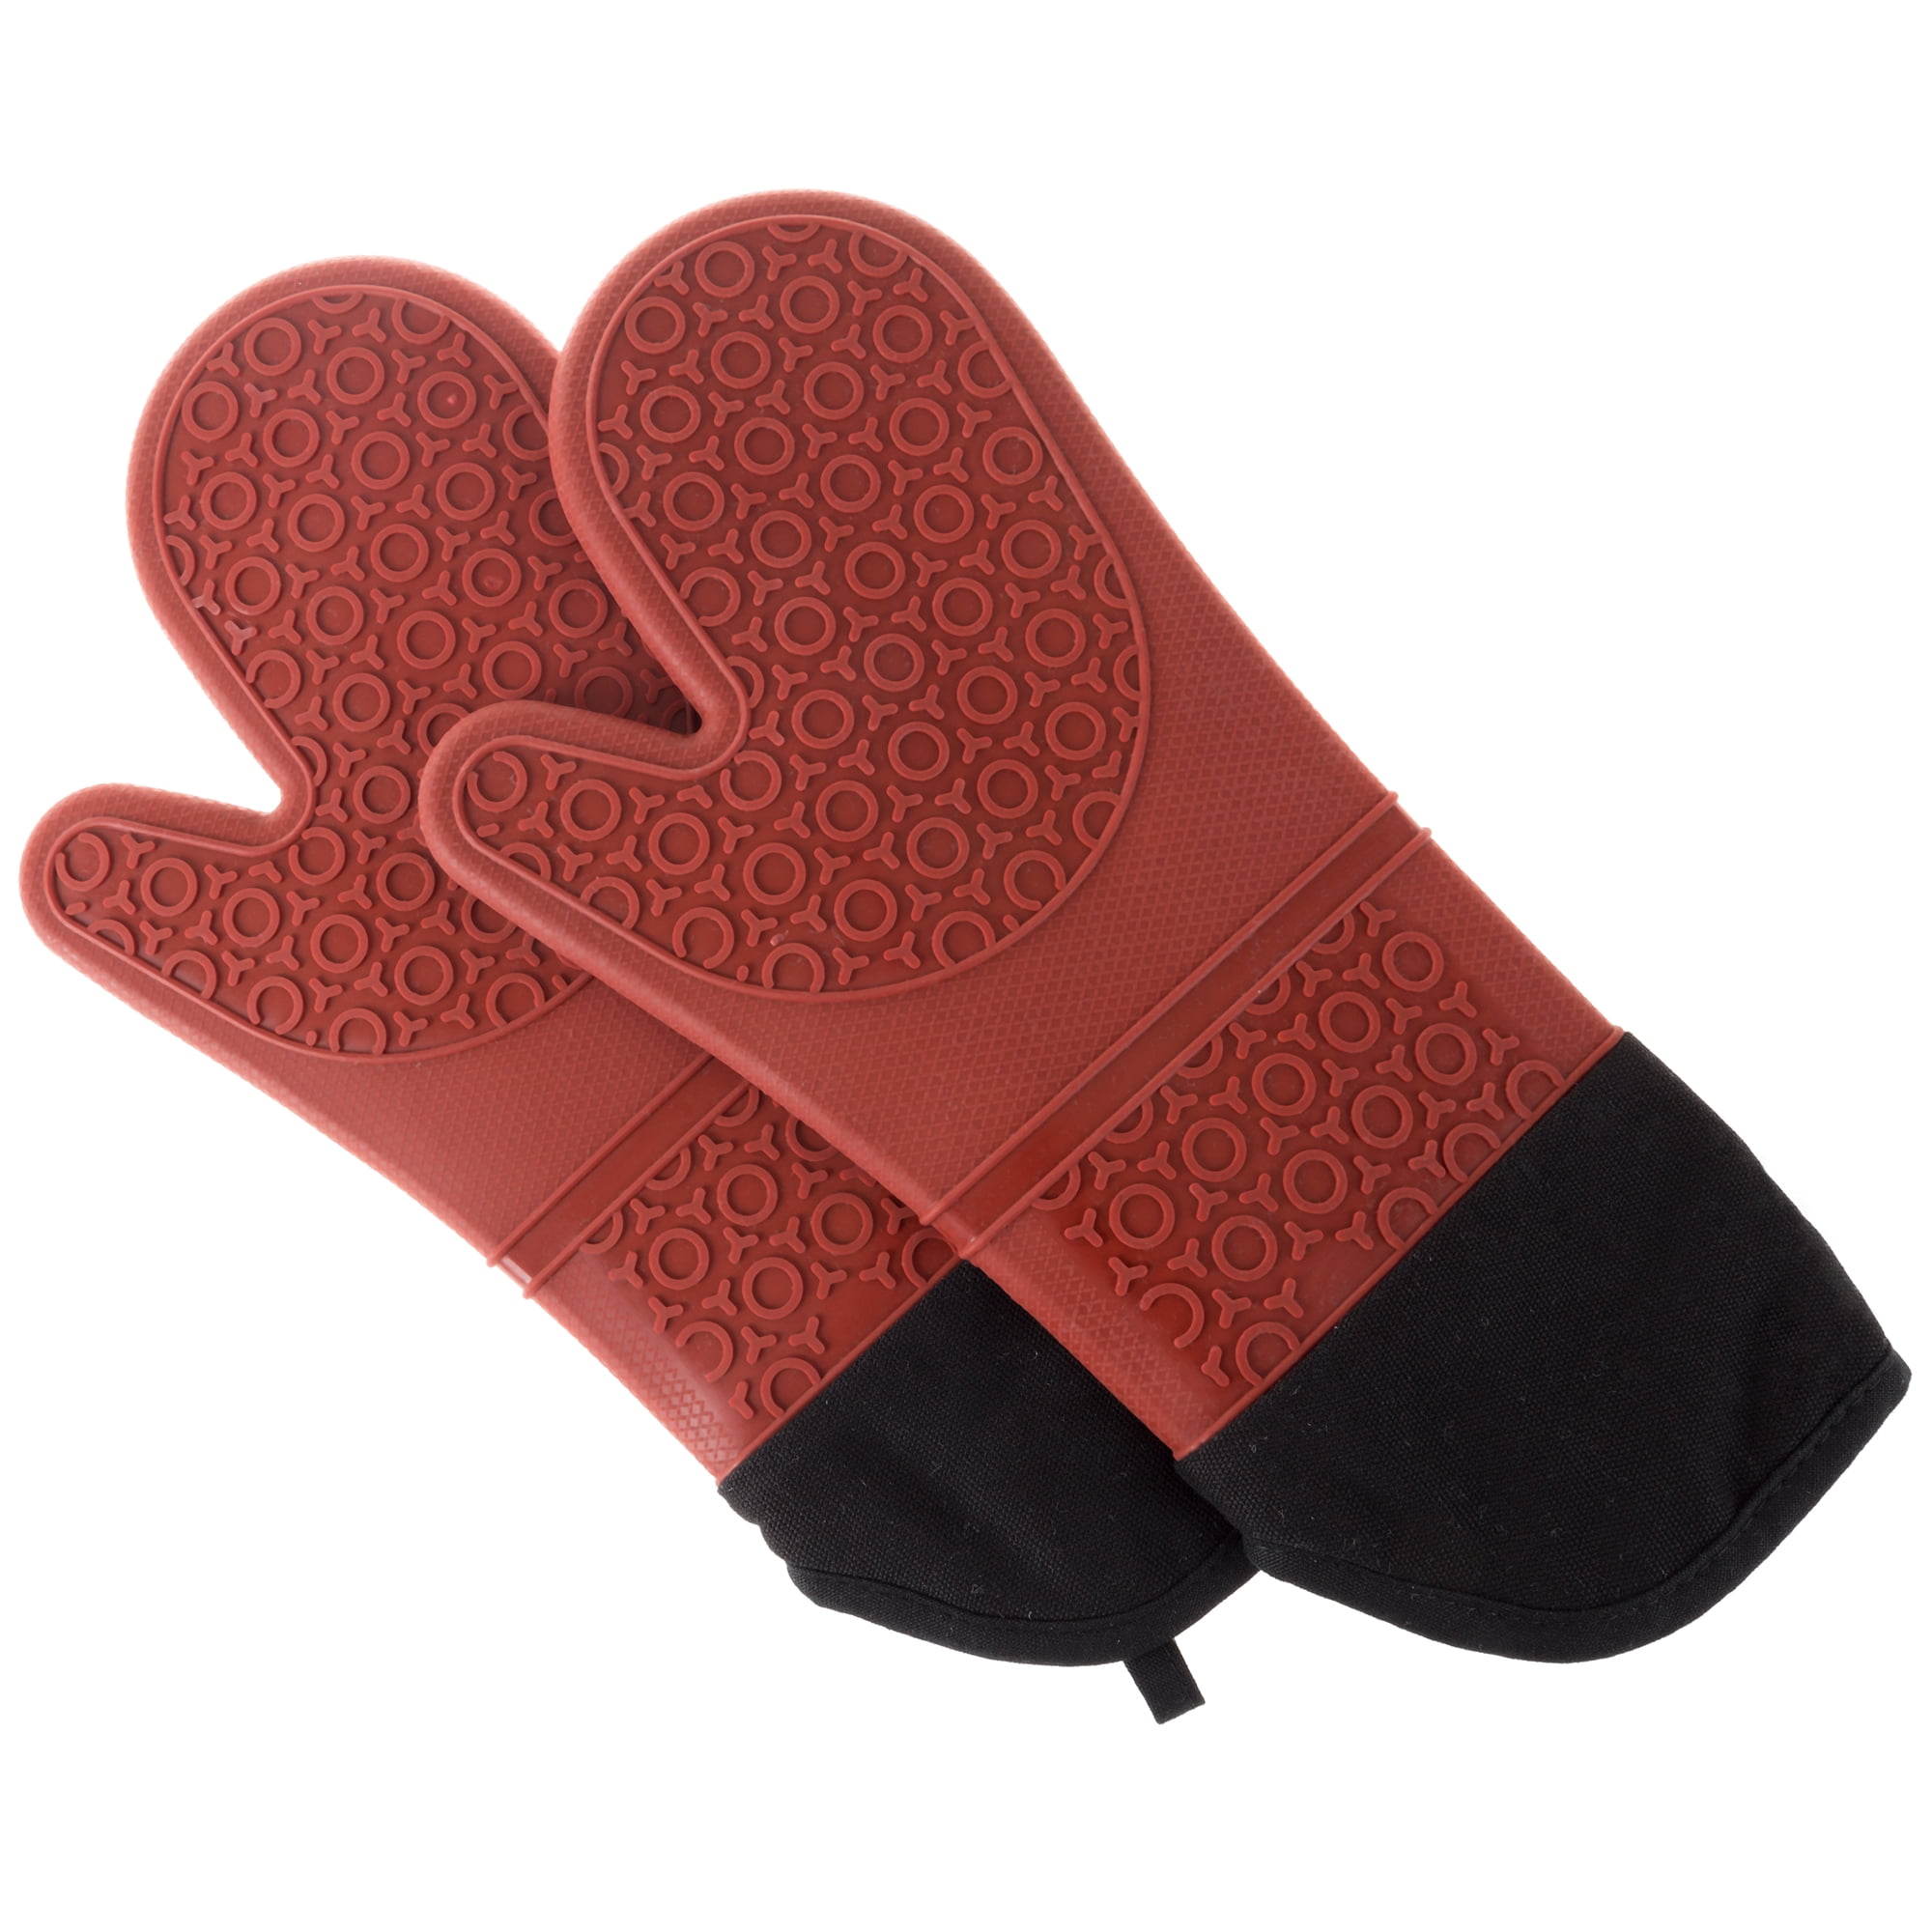 Cotton Pot Oven Mits Mitt Glove Brand New Heat Resistant Protector Red Free Ship